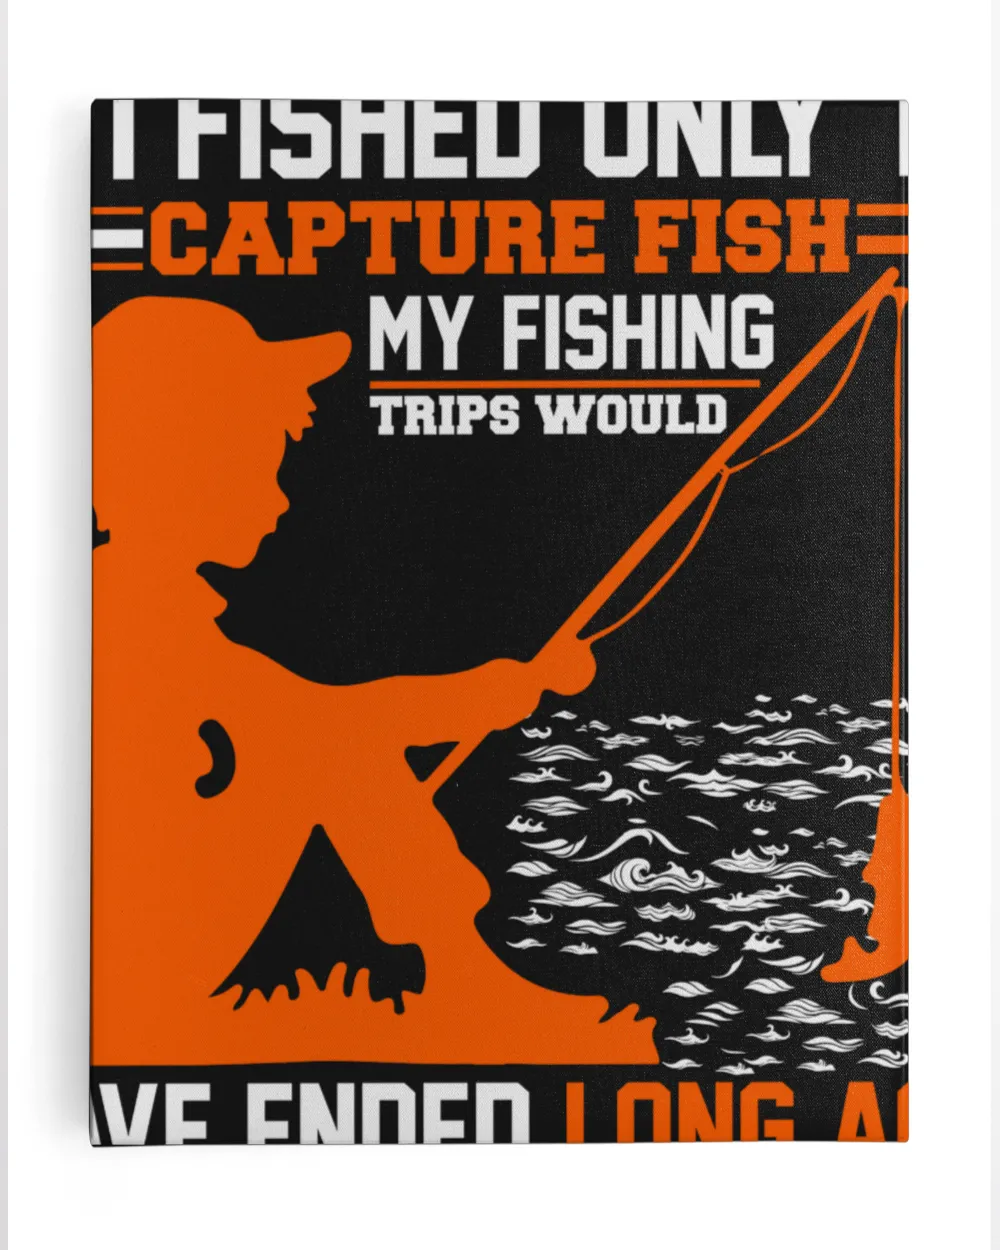 If I Fished Only To Capture Fish, My Fishing Trips Would Have Ended Long Ago